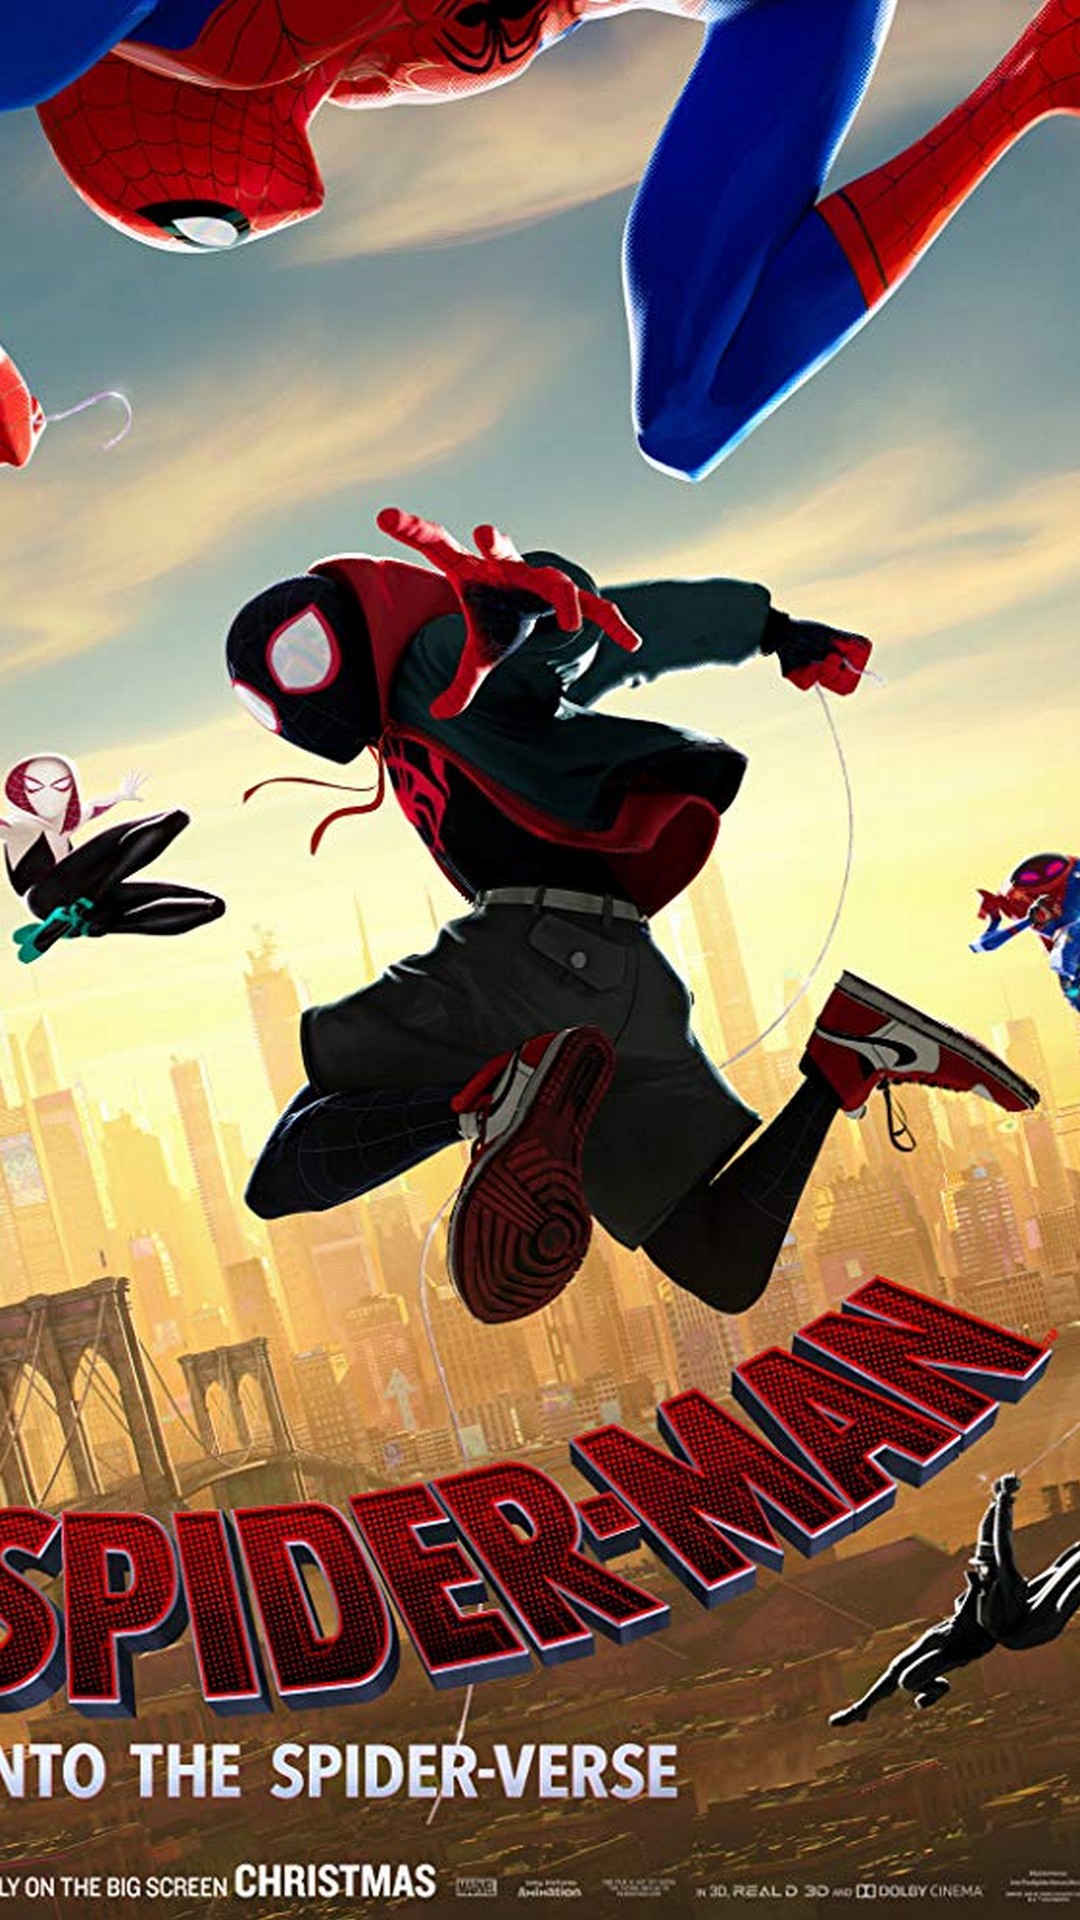 Spider-Man Into the Spider-Verse 2018 Phone Wallpaper with image resolution 1080x1920 pixel. You can make this wallpaper for your Desktop Computer Backgrounds, Mac Wallpapers, Android Lock screen or iPhone Screensavers